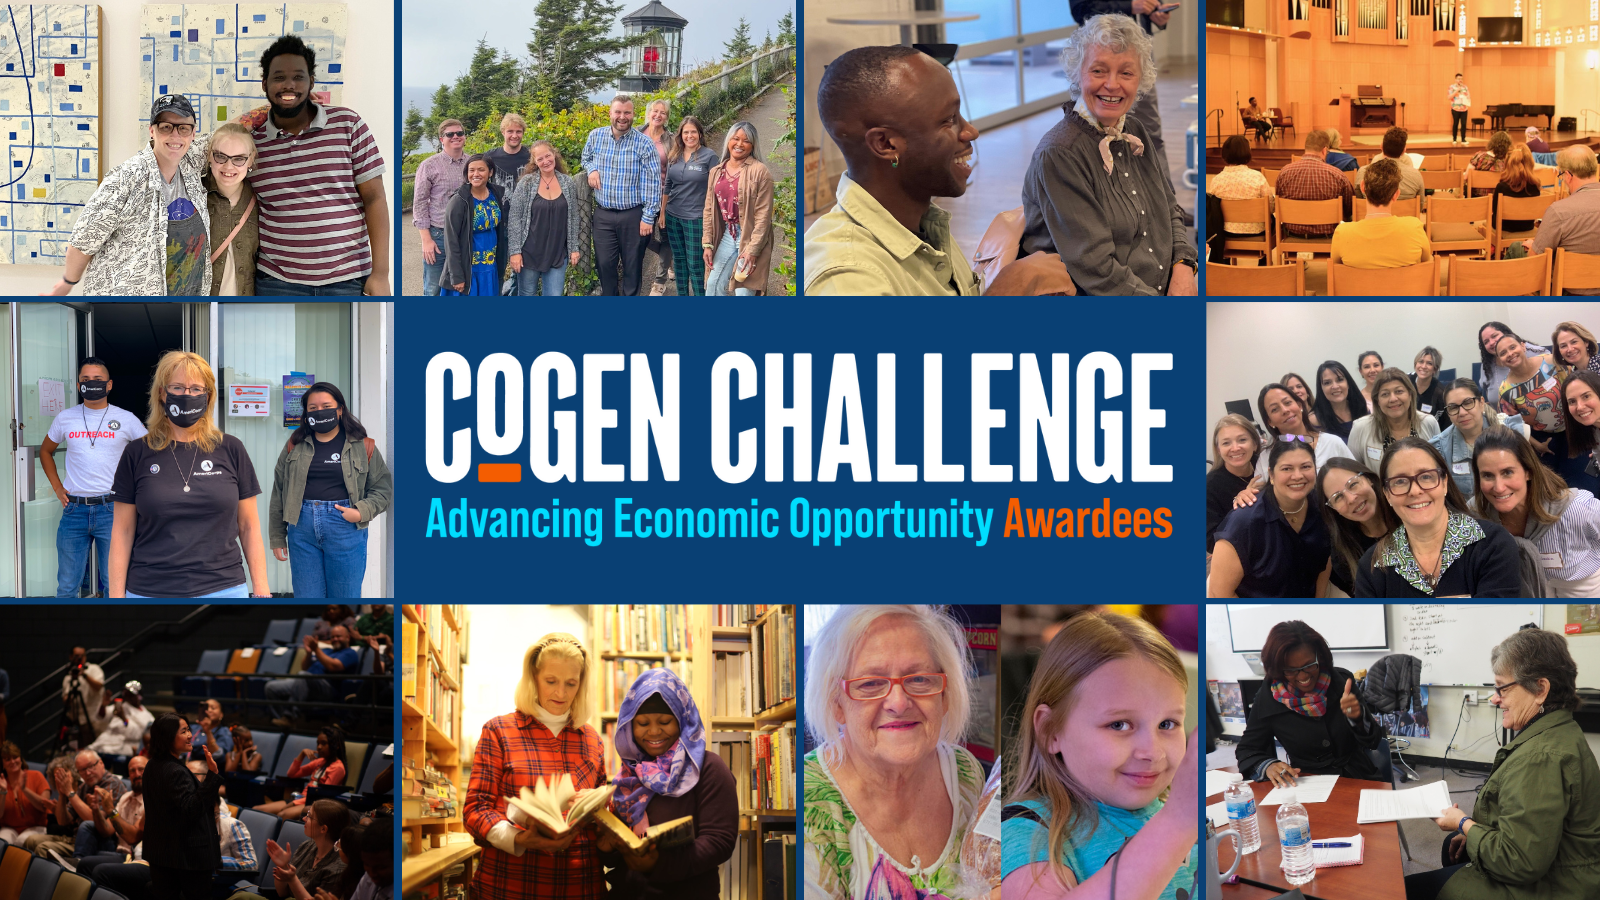 Images from all of the CoGen Challenge Advancing Economic Opportunity awardee's programs